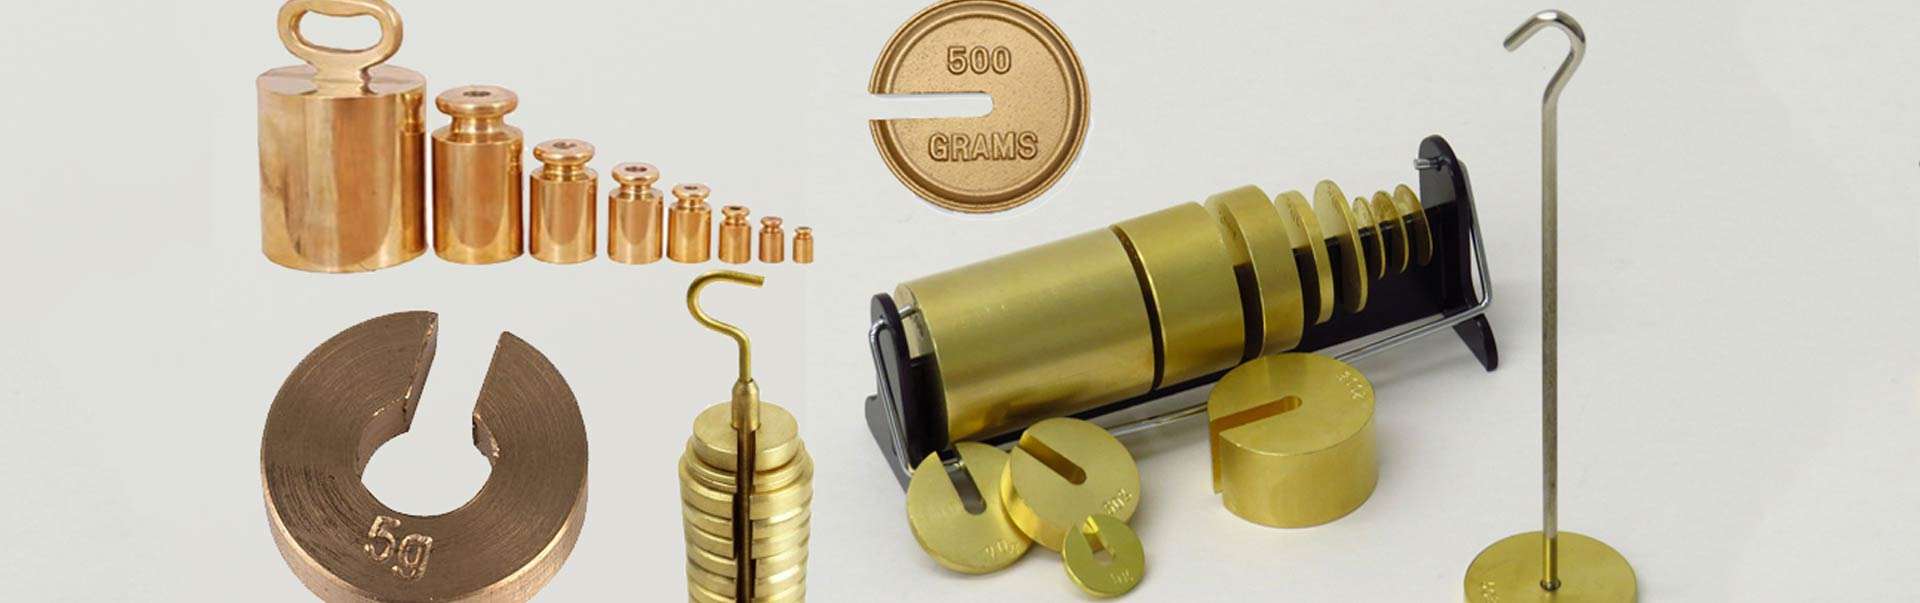 Test Weights Manufacturers in indore